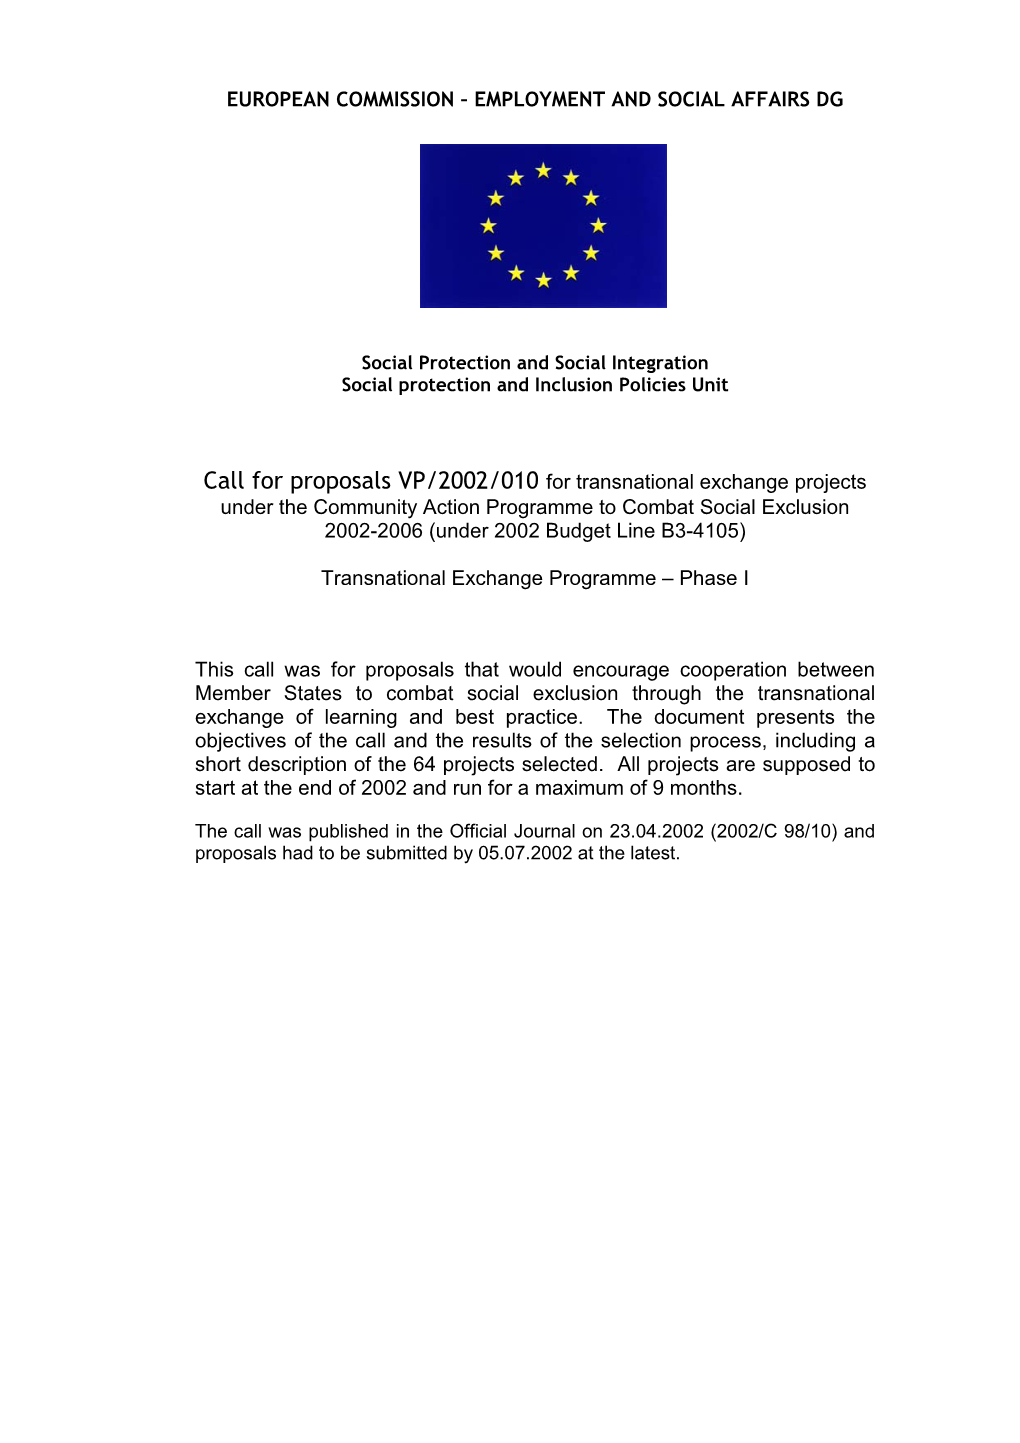 Call for Proposals VP/2002/010 for Transnational Exchange Projects